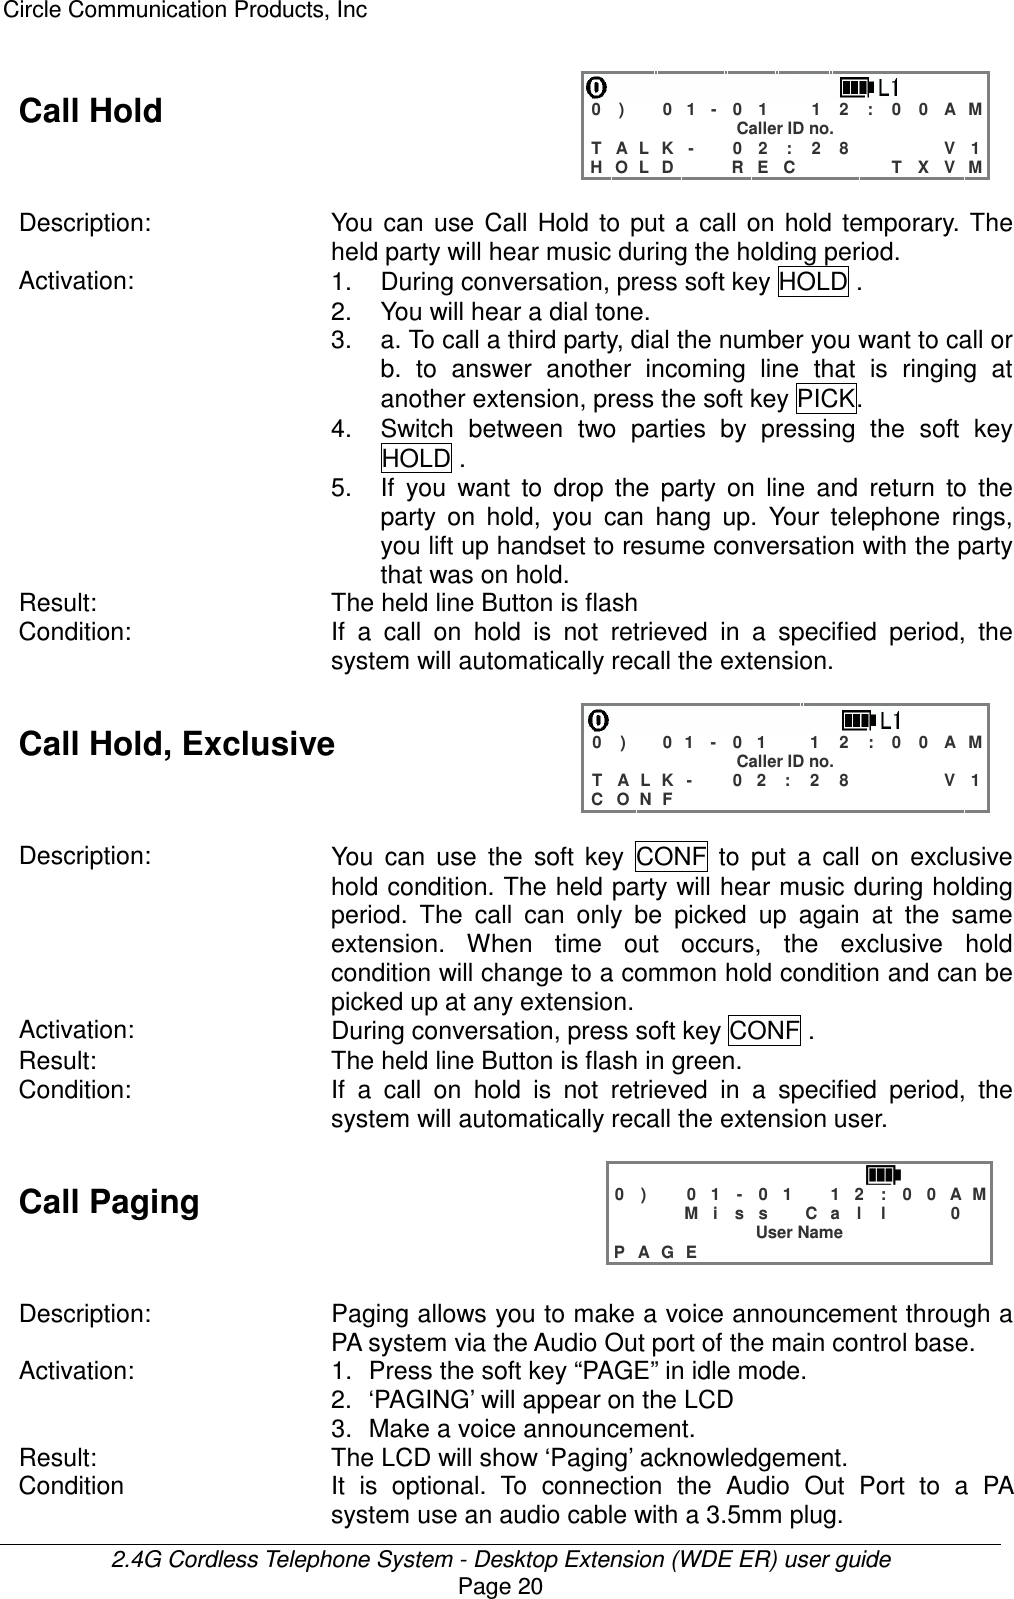 Circle Communication Products, Inc  2.4G Cordless Telephone System - Desktop Extension (WDE ER) user guide Page 20 Call Hold    0 )   0 1 - 0 1  1 2 : 0 0 A M Caller ID no. T A L K -  0 2 : 2 8    V 1 H O L D   R E C    T X V M  Description: You  can  use  Call  Hold  to  put a  call  on  hold  temporary.  The held party will hear music during the holding period. Activation:  1.  During conversation, press soft key HOLD . 2.  You will hear a dial tone. 3.  a. To call a third party, dial the number you want to call or b.  to  answer  another  incoming  line  that  is  ringing  at another extension, press the soft key PICK. 4.  Switch  between  two  parties  by  pressing  the  soft  key HOLD . 5. If  you  want  to  drop  the  party  on  line  and  return  to  the party  on  hold,  you  can  hang  up.  Your  telephone  rings, you lift up handset to resume conversation with the party that was on hold. Result:  The held line Button is flash Condition: If  a  call  on  hold  is  not  retrieved  in  a  specified  period,  the system will automatically recall the extension.  Call Hold, Exclusive    0 )   0 1 - 0 1  1 2 : 0 0 A M Caller ID no. T A L K -  0 2 : 2 8    V 1 C O N F              Description:  You  can  use  the  soft  key  CONF  to  put  a  call  on  exclusive hold condition. The held party will hear music during holding period.  The  call  can  only  be  picked  up  again  at  the  same extension.  When  time  out occurs,  the  exclusive  hold condition will change to a common hold condition and can be picked up at any extension. Activation:  During conversation, press soft key CONF . Result:  The held line Button is flash in green. Condition:  If  a  call  on  hold  is  not  retrieved  in  a  specified  period,  the system will automatically recall the extension user.  Call Paging   0 )   0 1 - 0 1  1 2 : 0 0 A M    M i s s  C a l l   0  User Name P A G E              Description:  Paging allows you to make a voice announcement through a PA system via the Audio Out port of the main control base. Activation:  1.  Press the soft key “PAGE” in idle mode. 2.  ‘PAGING’ will appear on the LCD 3.  Make a voice announcement. Result:  The LCD will show ‘Paging’ acknowledgement. Condition  It  is optional.  To  connection  the  Audio  Out  Port  to  a  PA system use an audio cable with a 3.5mm plug. 